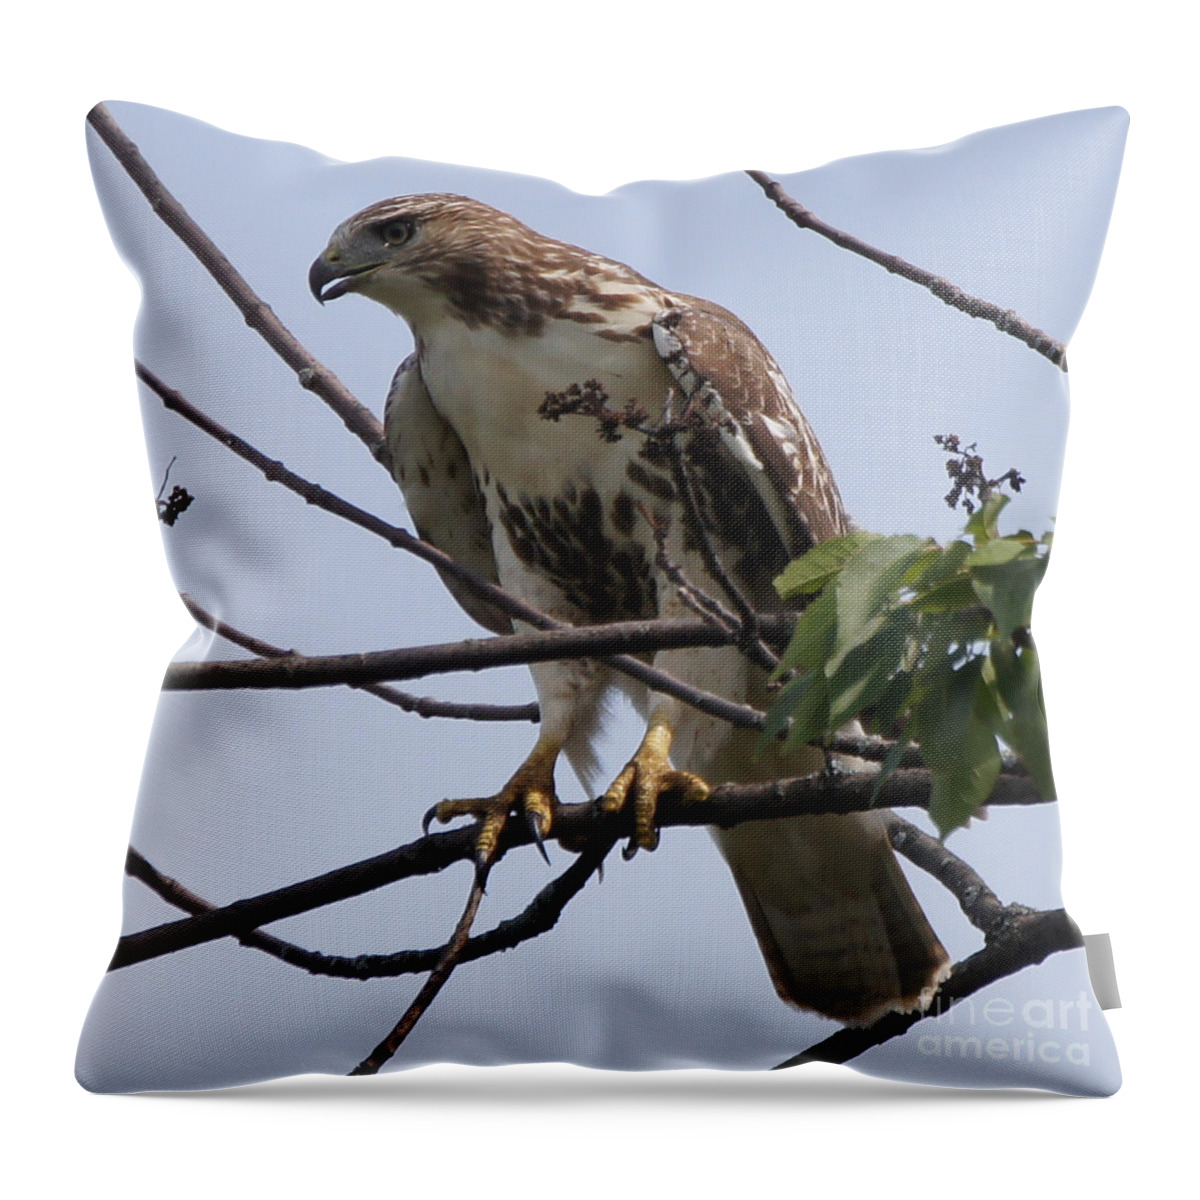 Hawk Throw Pillow featuring the photograph Hawk Before The Kill by Robert Alter Reflections of Infinity